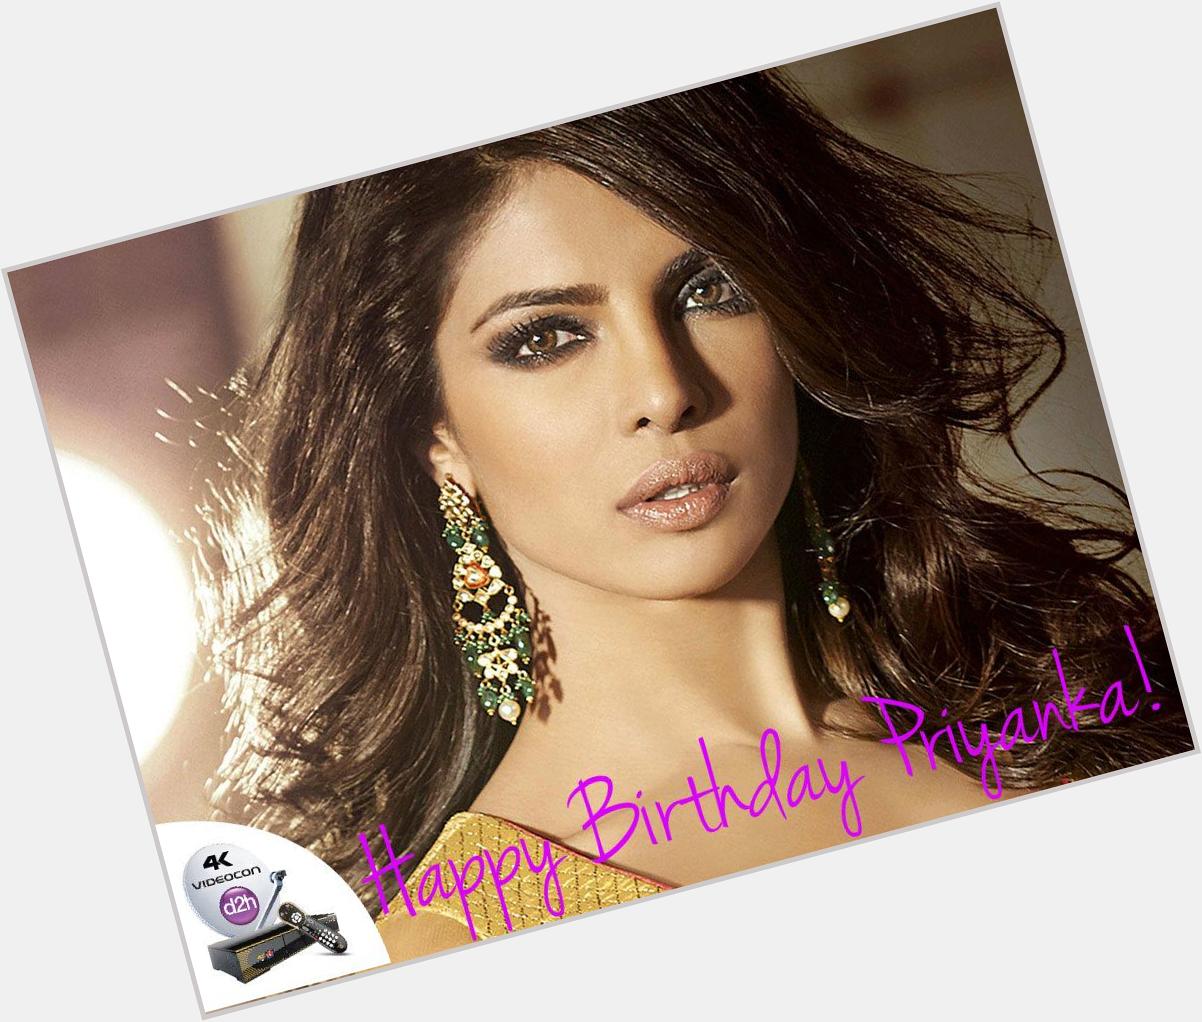 Happy Birthday Priyanka Chopra!
Join us in wishing the Mary Kom star all the joy and happiness in the world. 